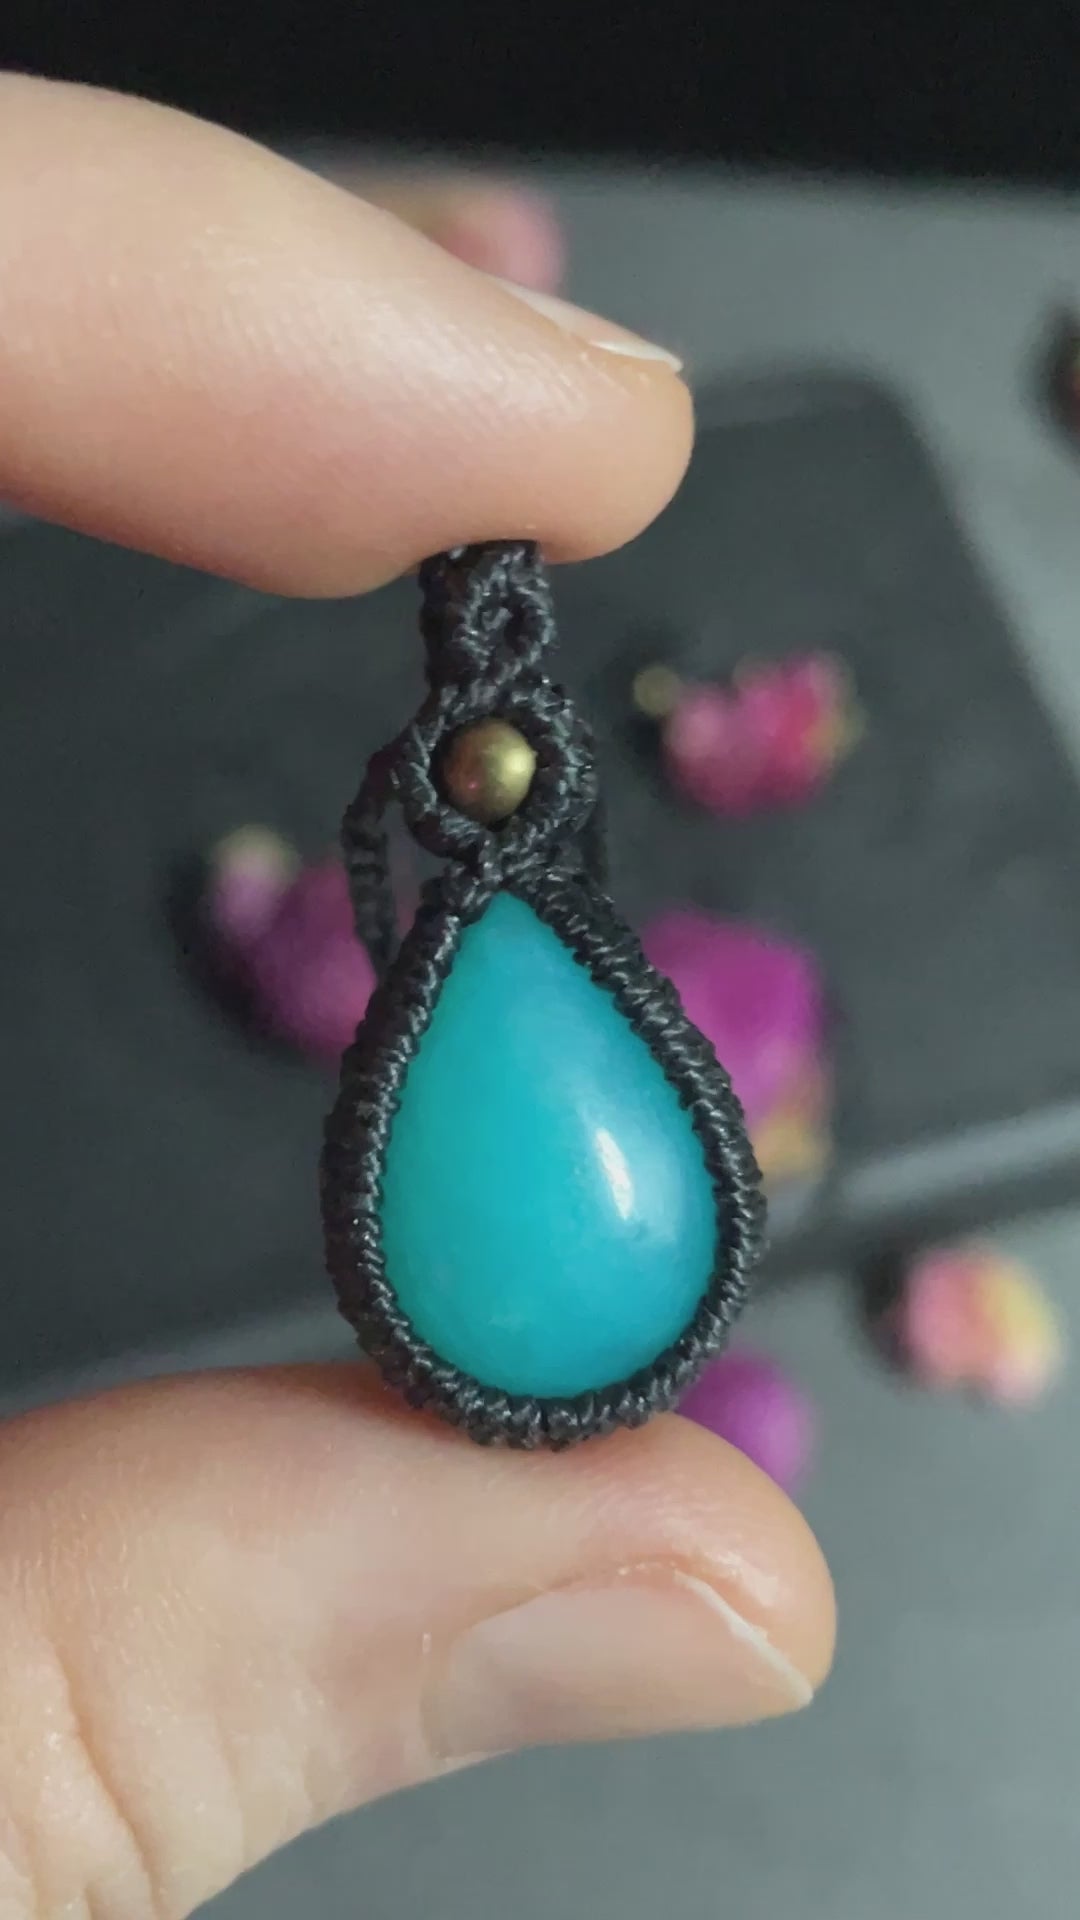 Pictured is a blue mountain jade cabochon wrapped in macrame thread. A gothic book and flowers are nearby.